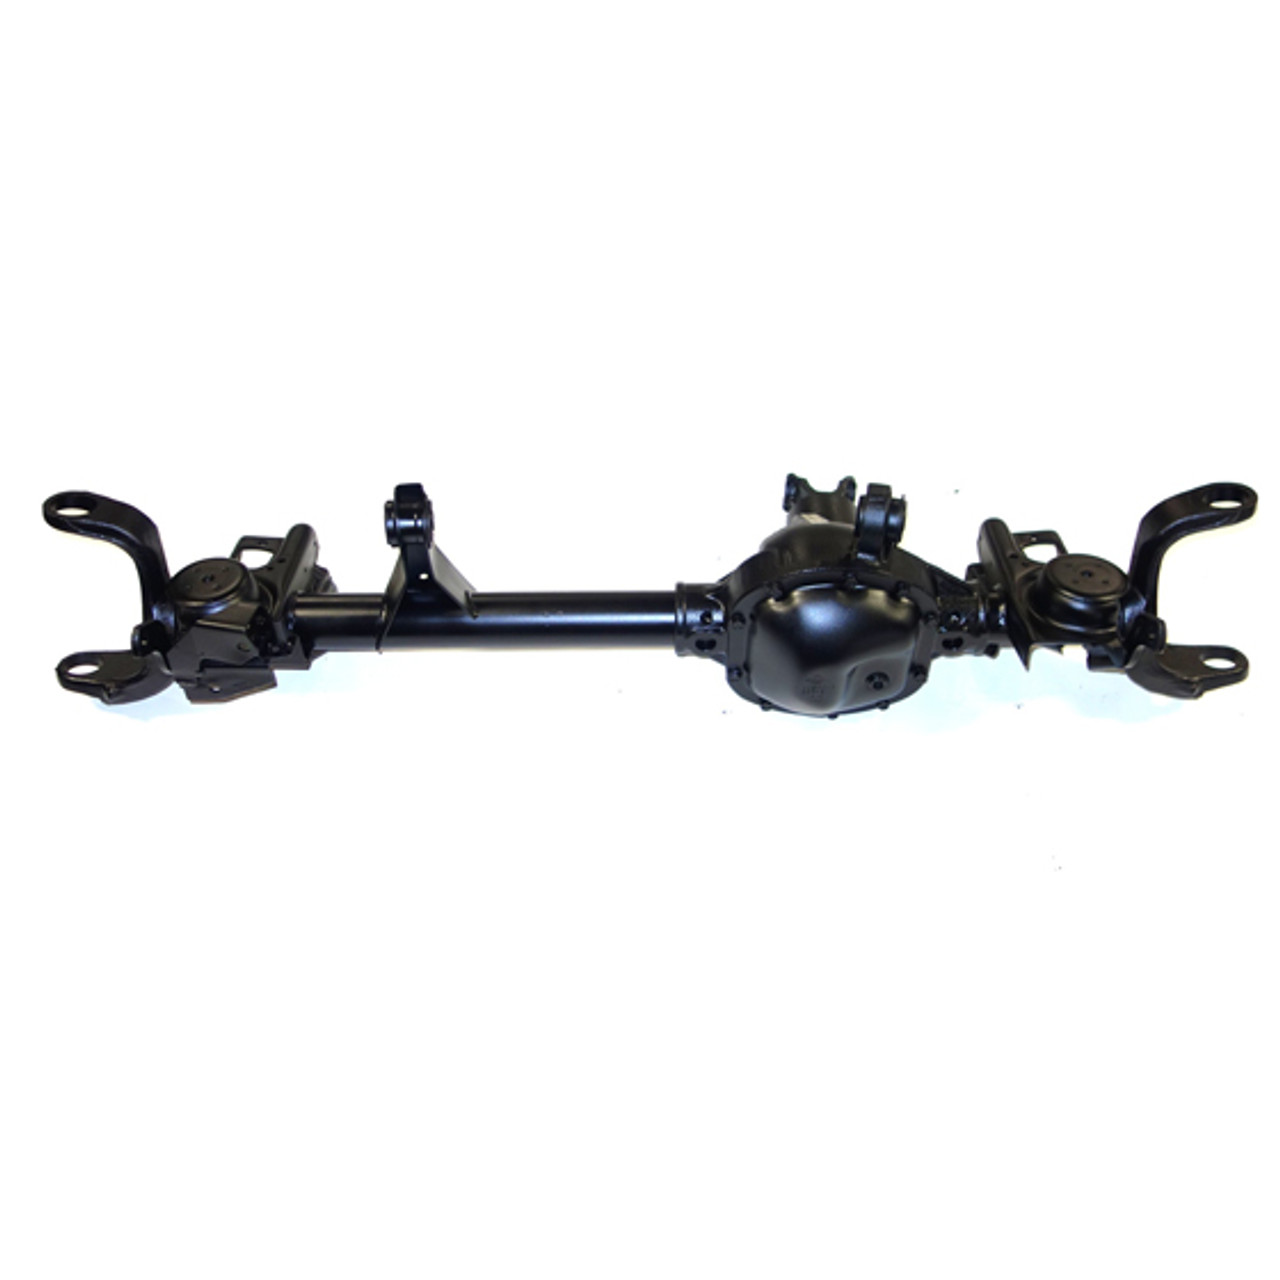 Reman Complete Axle Assembly for Dana 30 97-99 Jeep Wrangler 3.07 Ratio, ABS